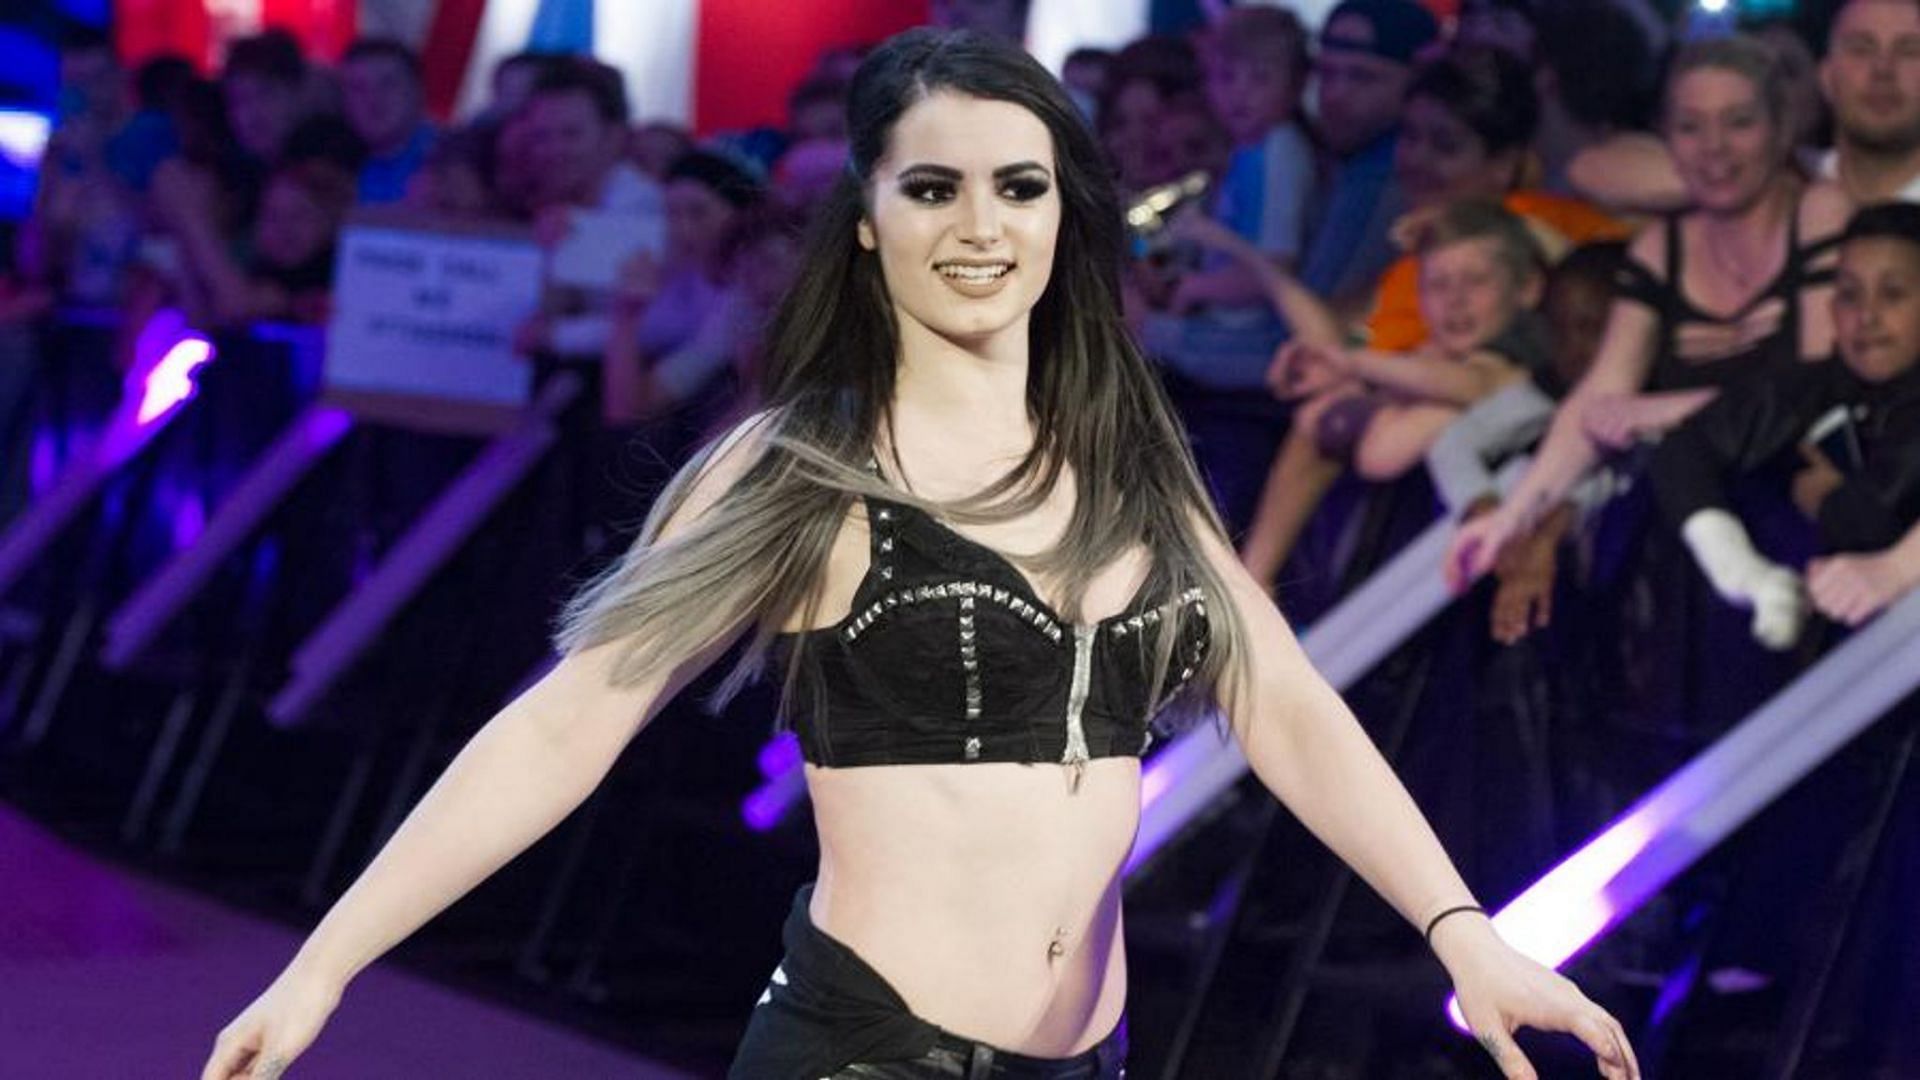 Paige has decided to leave WWE